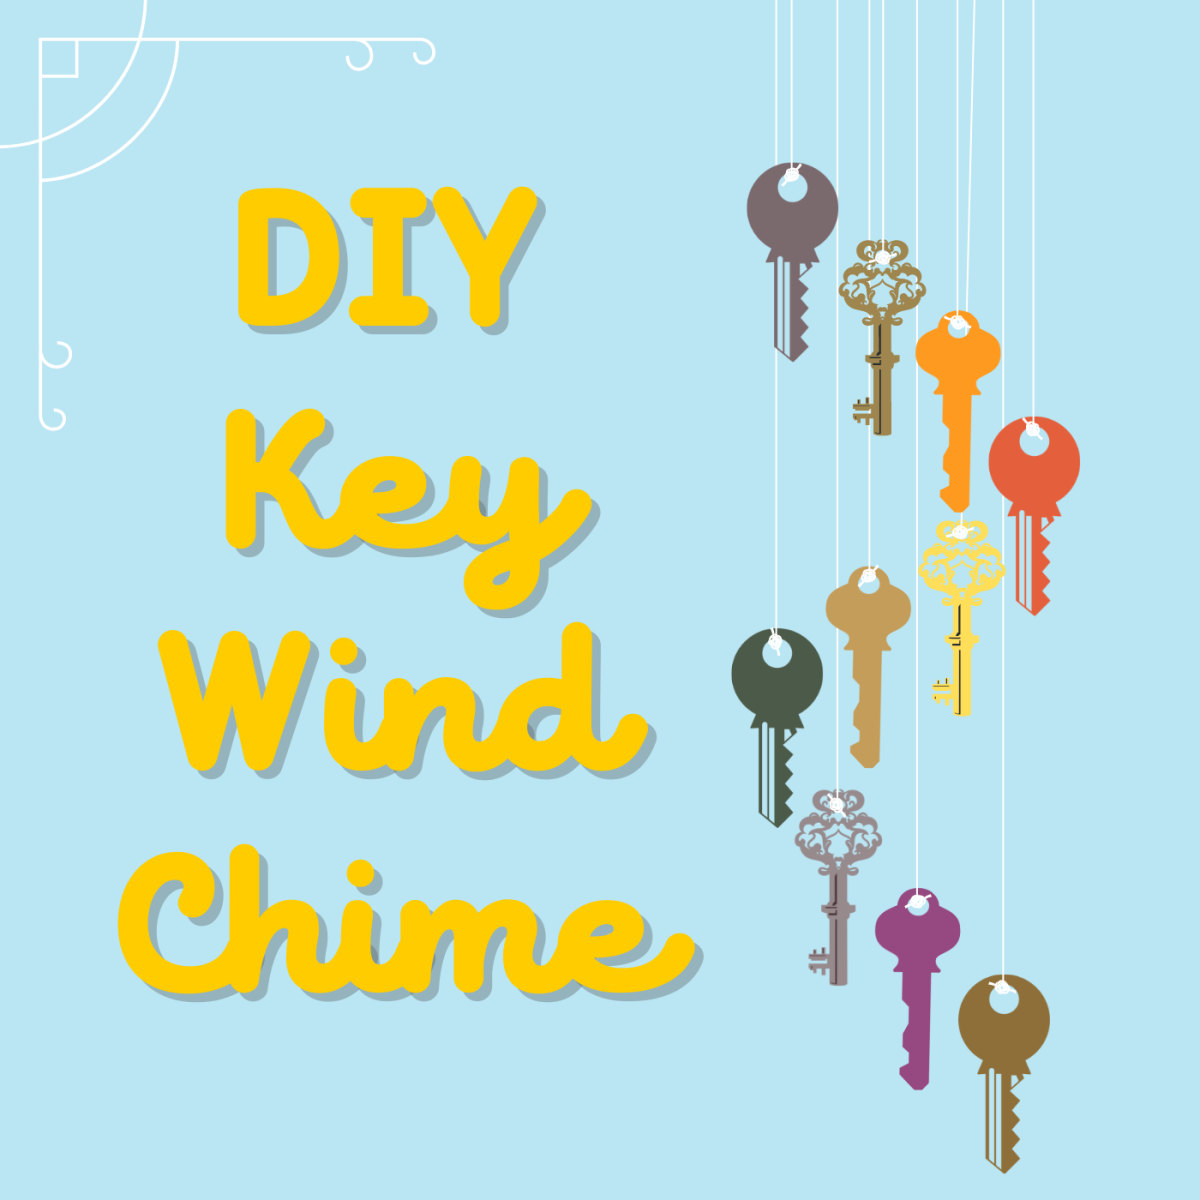 Keys will produce beautiful sounds when they clank against each other in the breeze. Learn how to turn your old keys into a pretty wind chime!